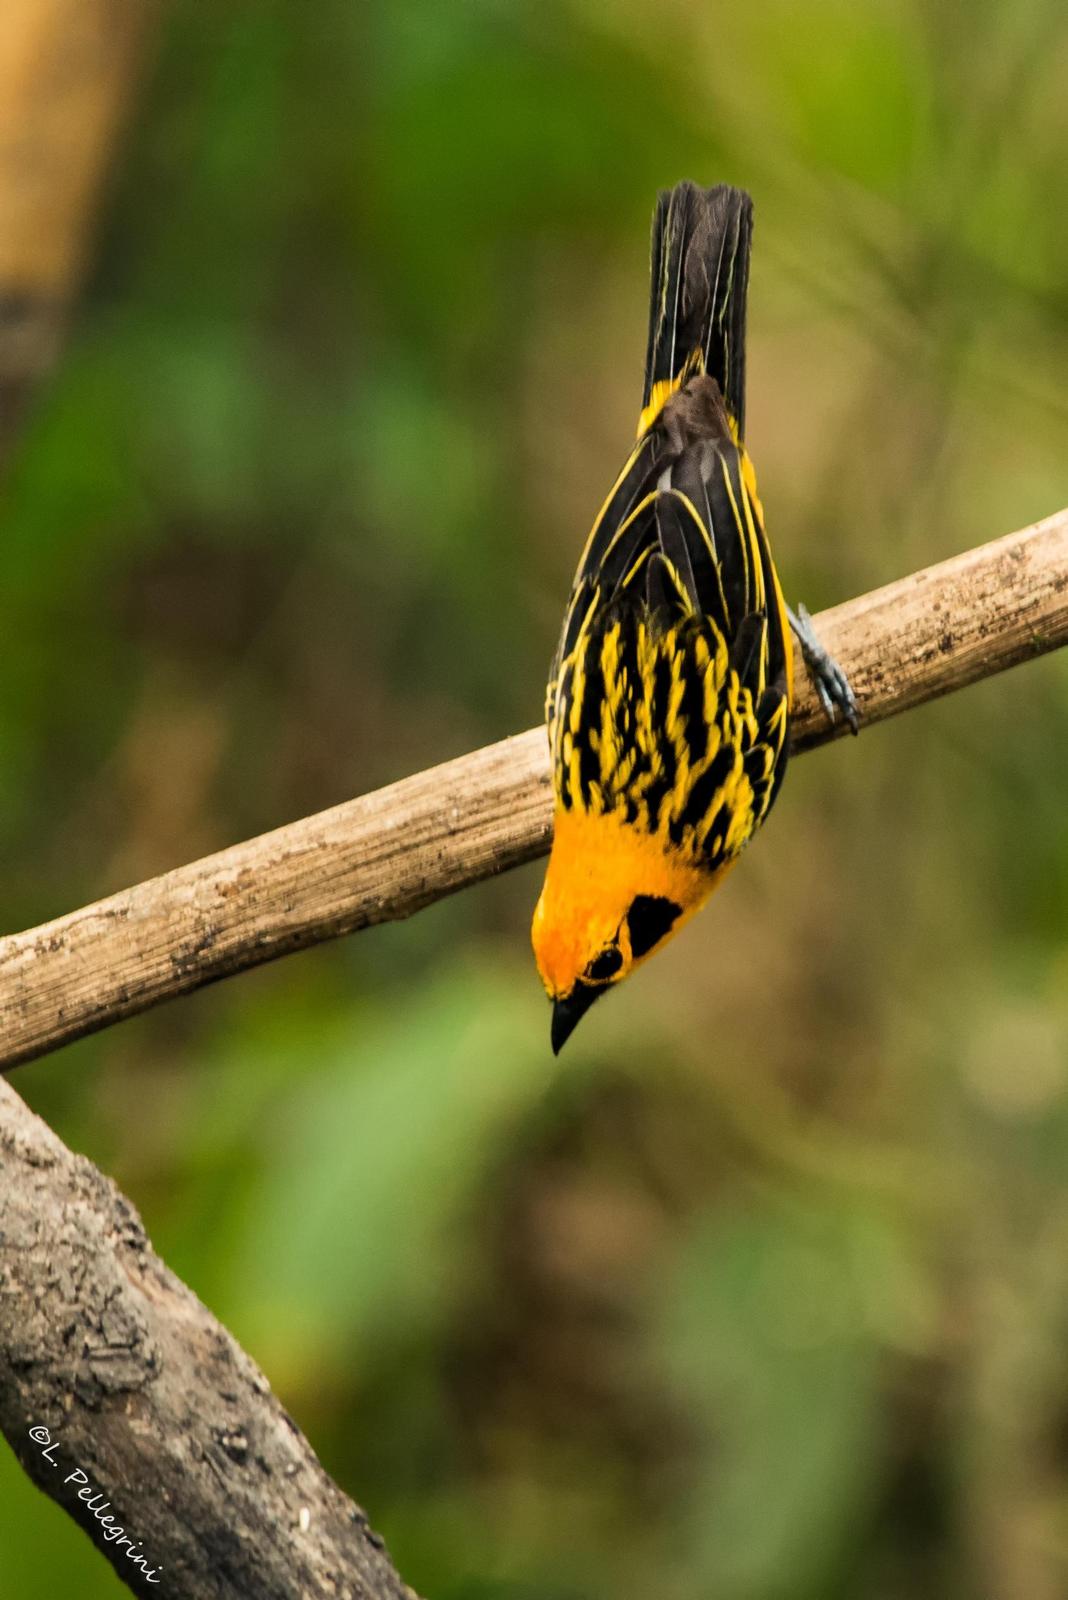 Golden Tanager Photo by Laurence Pellegrini